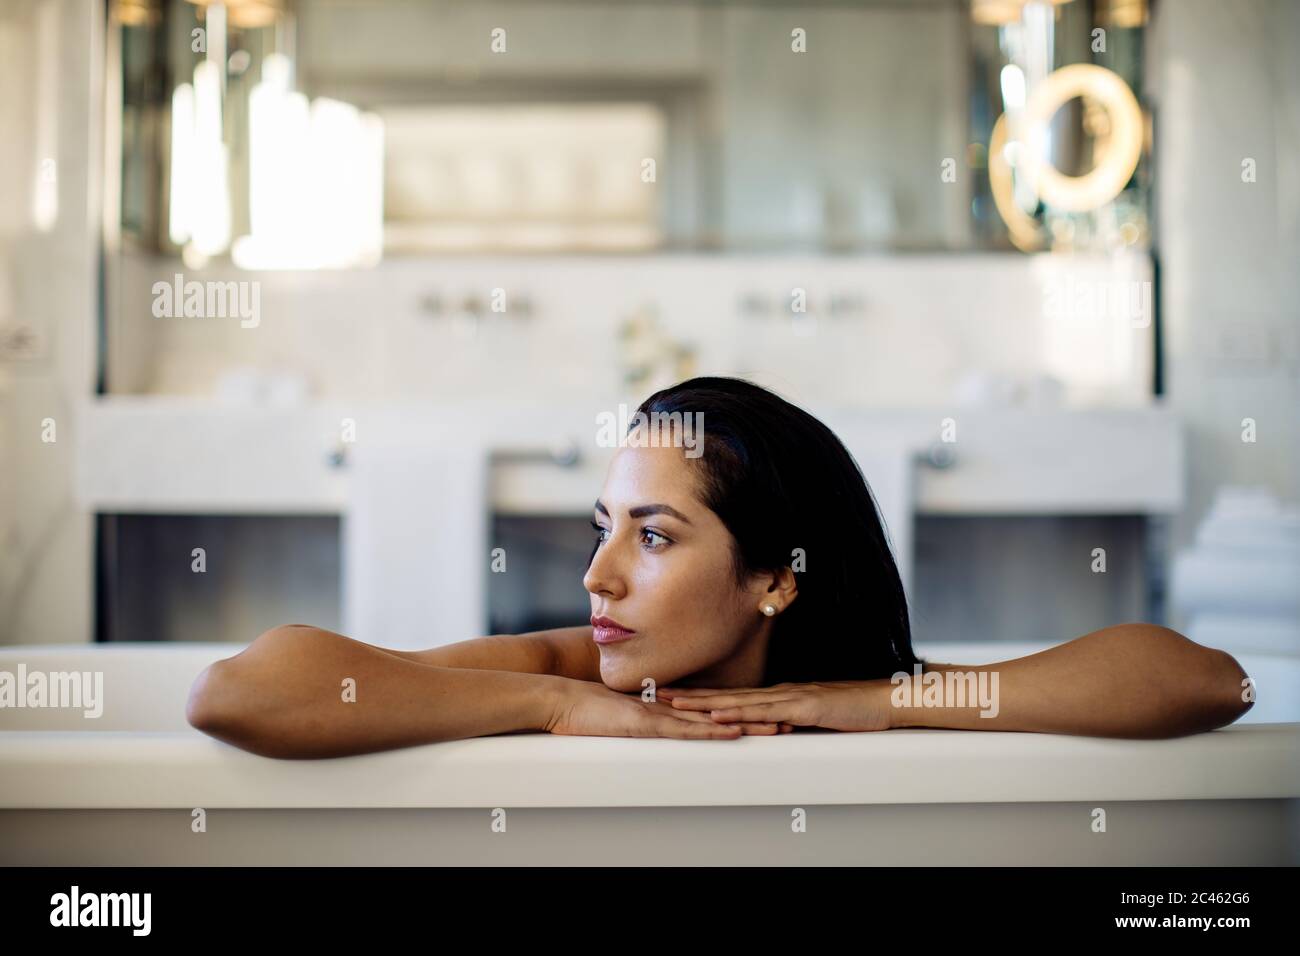 Woman relaxing in bathtub in suite Stock Photo